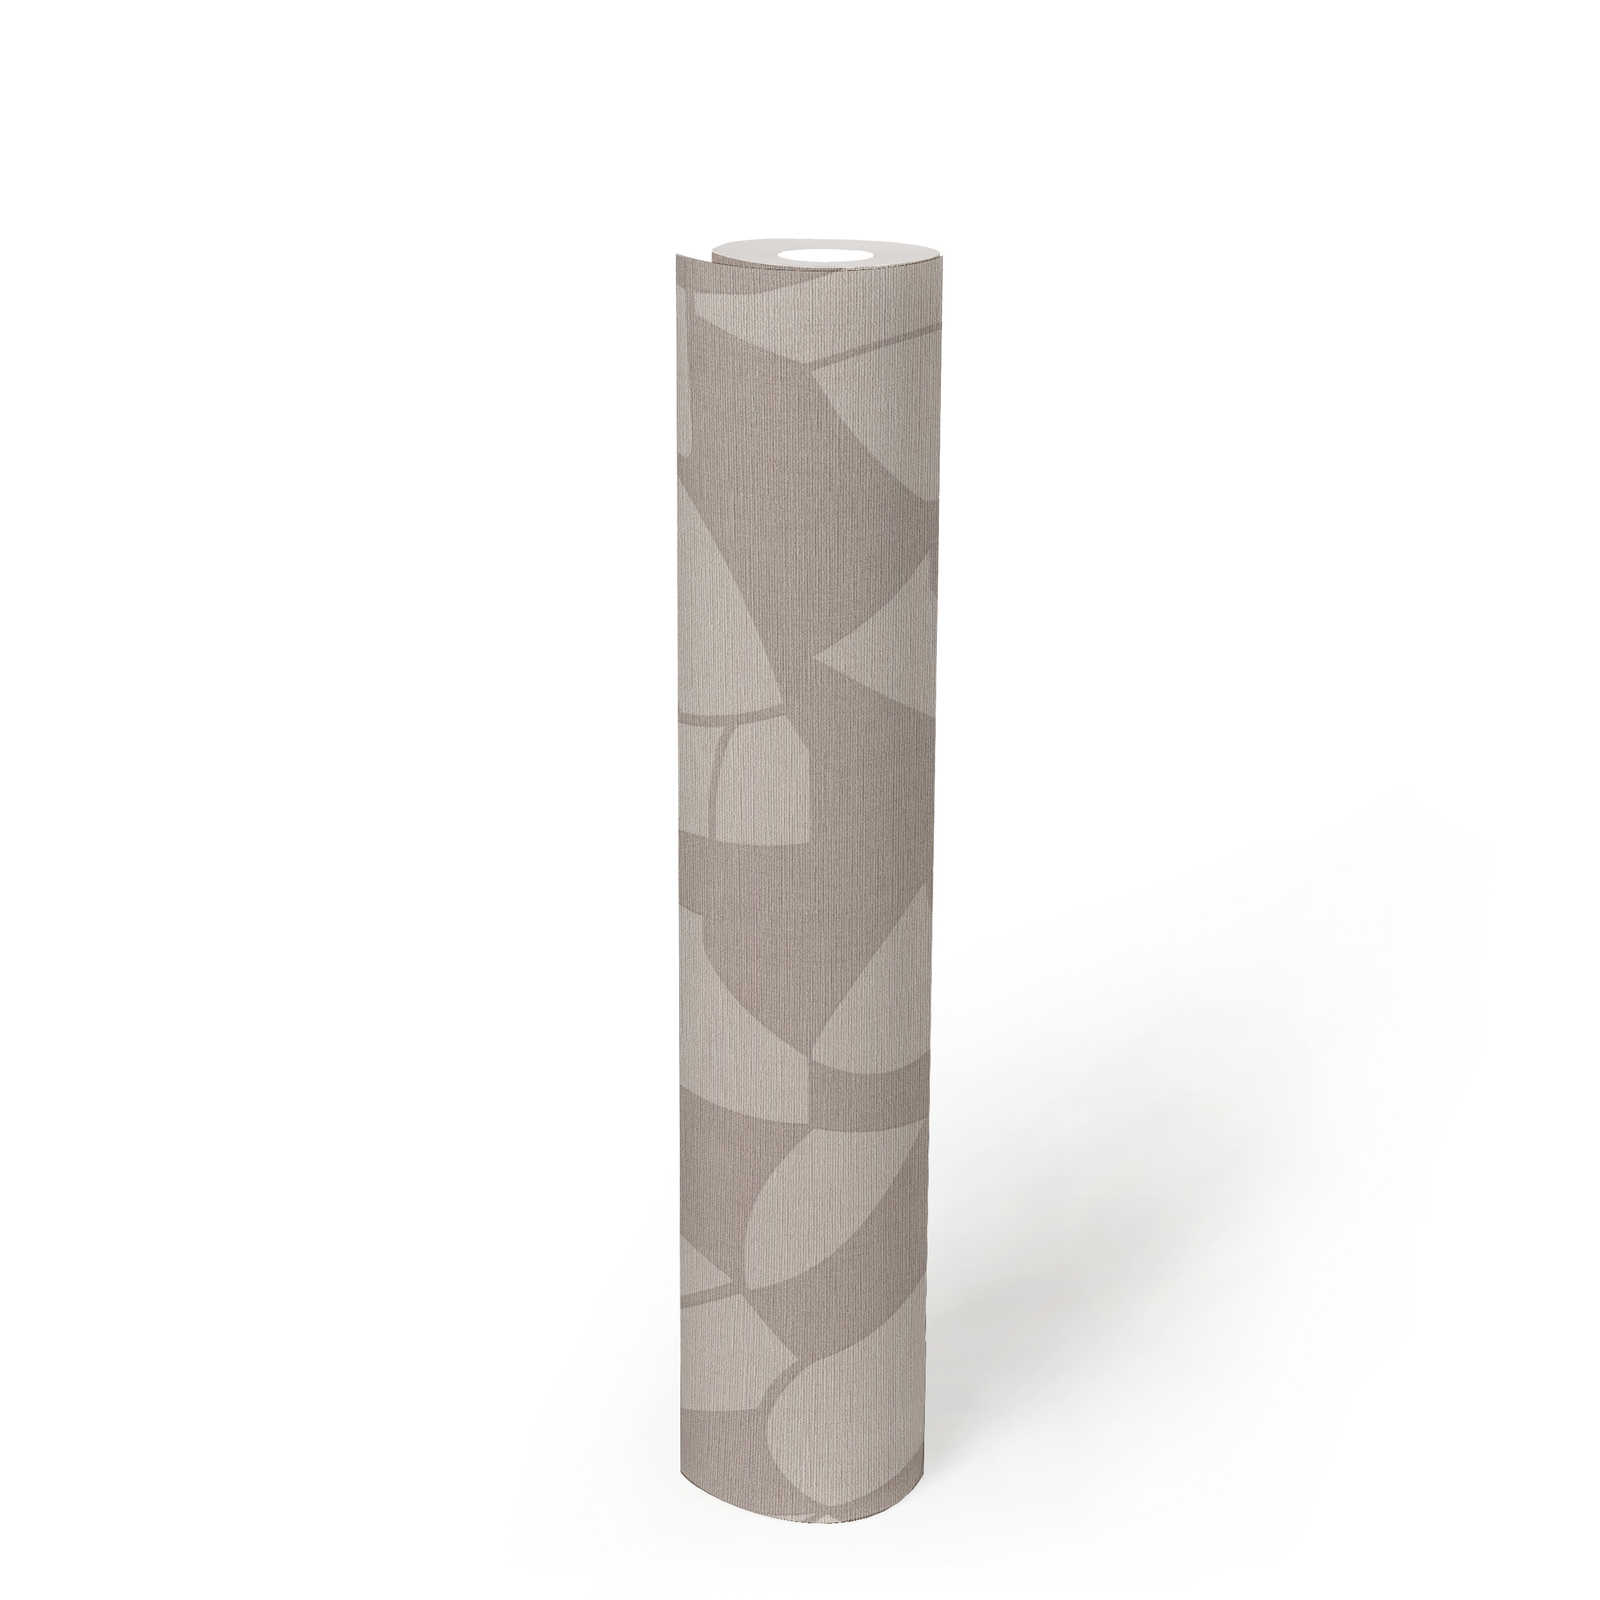             Non-woven wallpaper in subtle colours in an abstract pattern - grey, cream
        